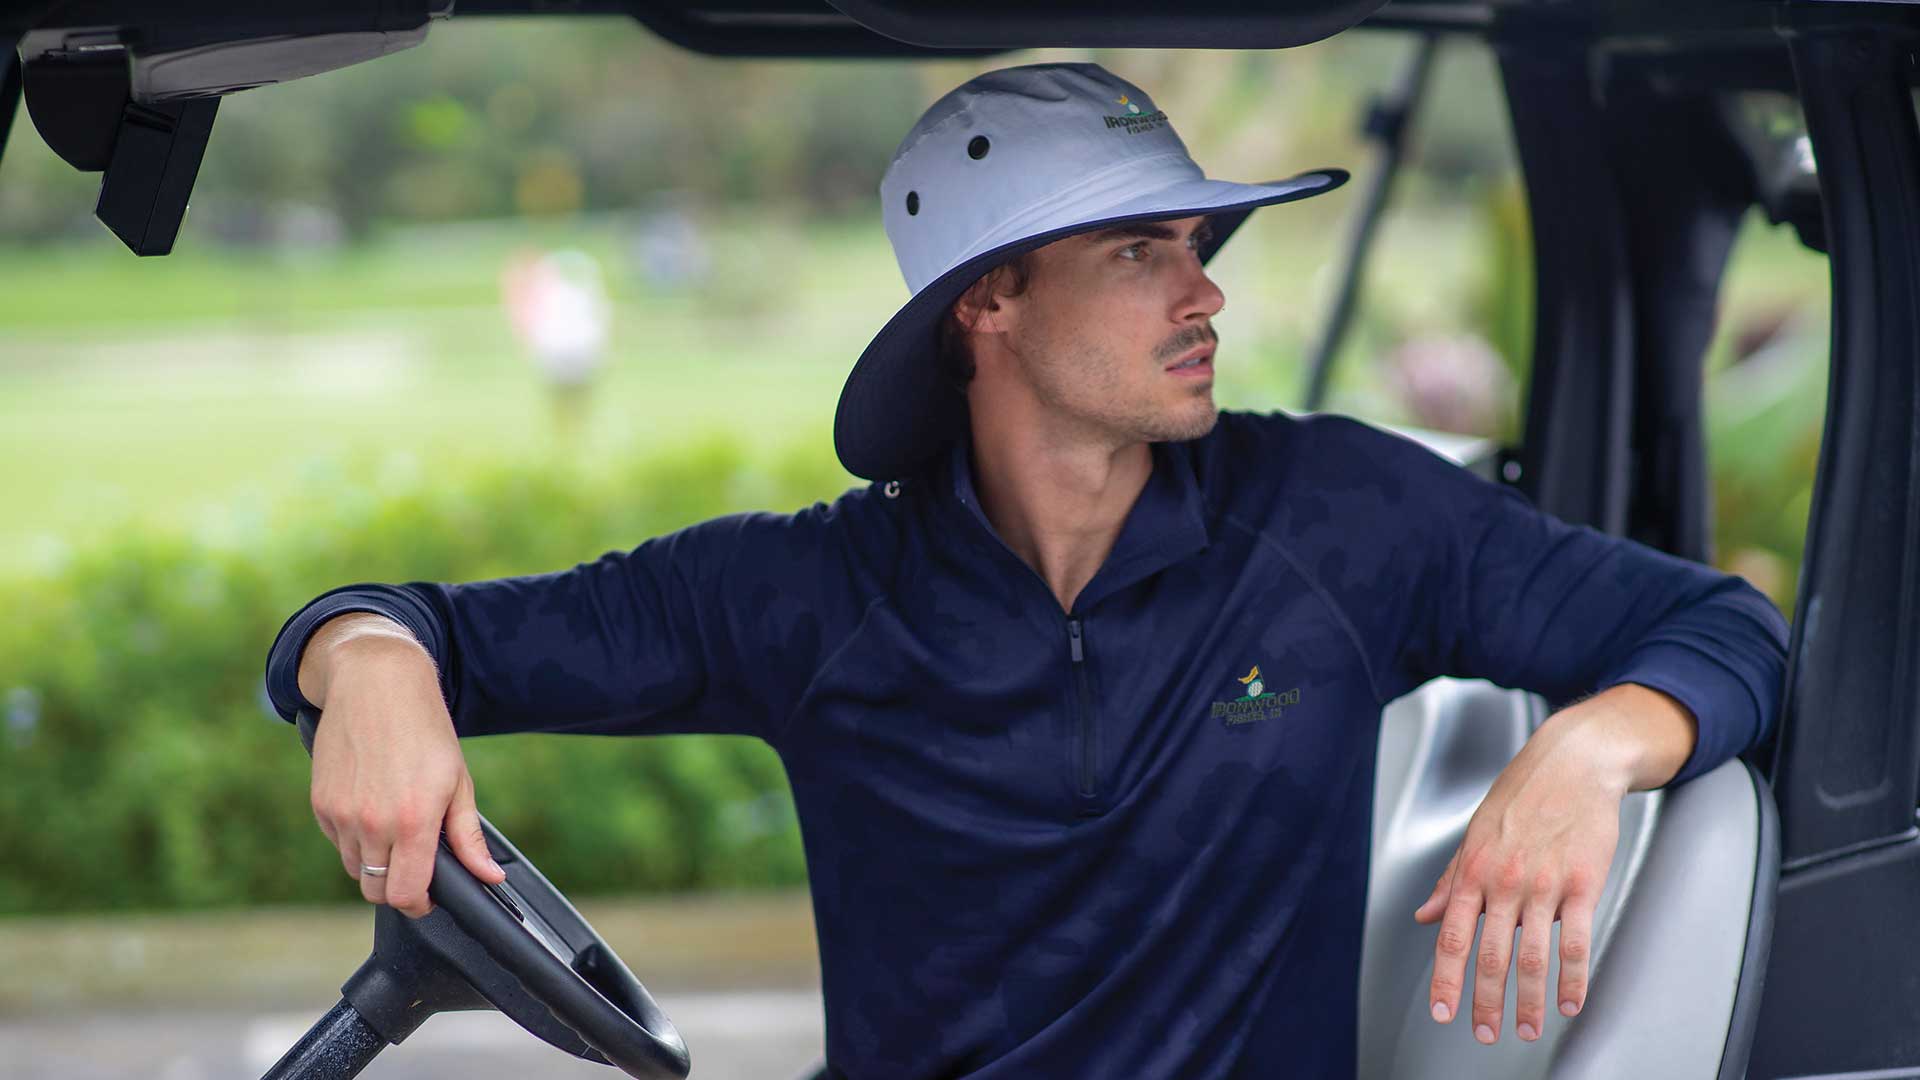 Man wearing a hat in a golf cart with long blue sleeve embroidered shirt.